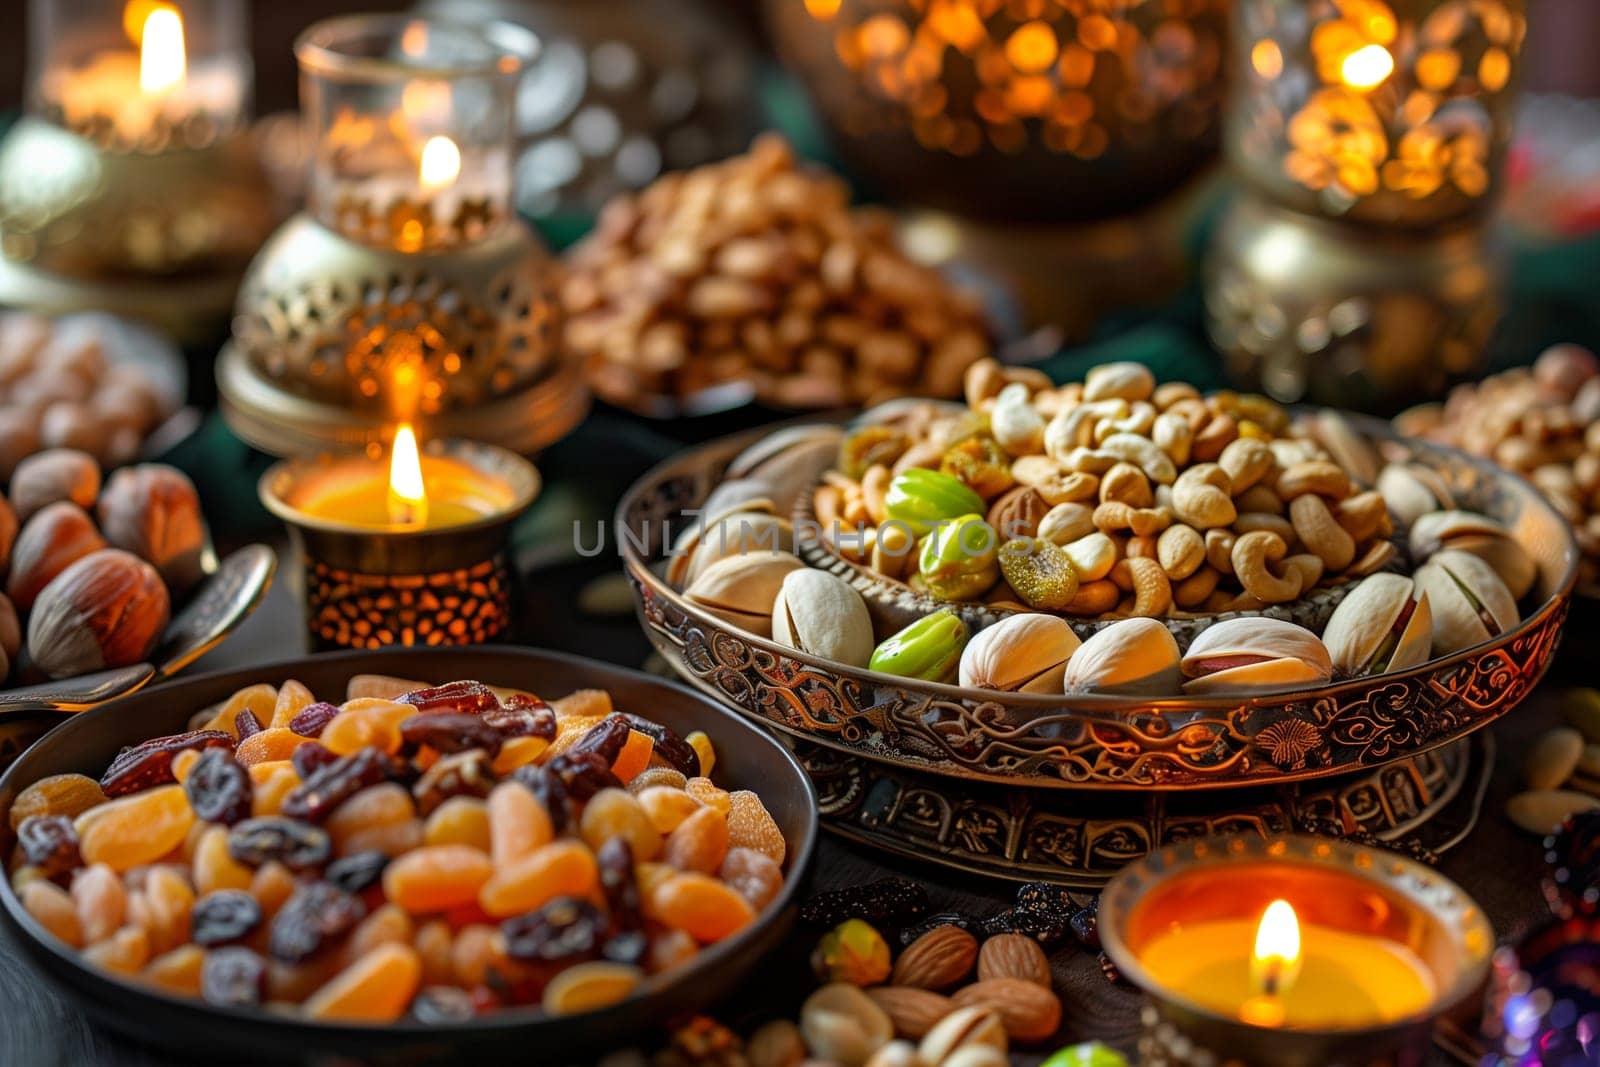 A spread of nuts and dried fruits arranged on ornate dishes, accompanied by lit candles, evokes a warm ambiance for a festive Islamic celebration.